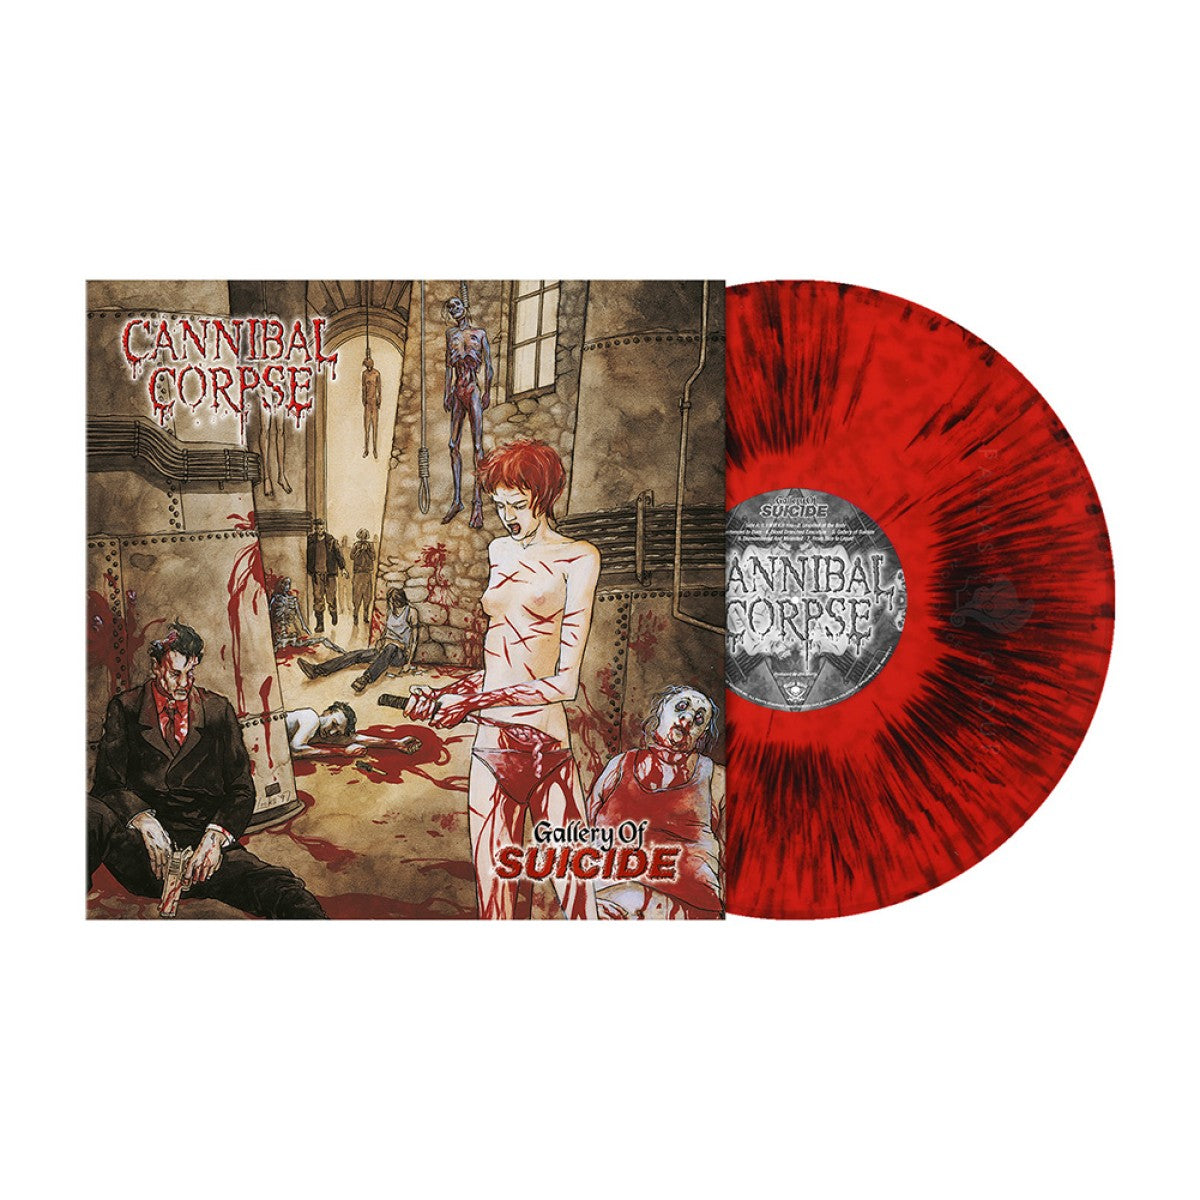 Cannibal Corpse "Gallery Of Suicide" Red / Black Dust Vinyl